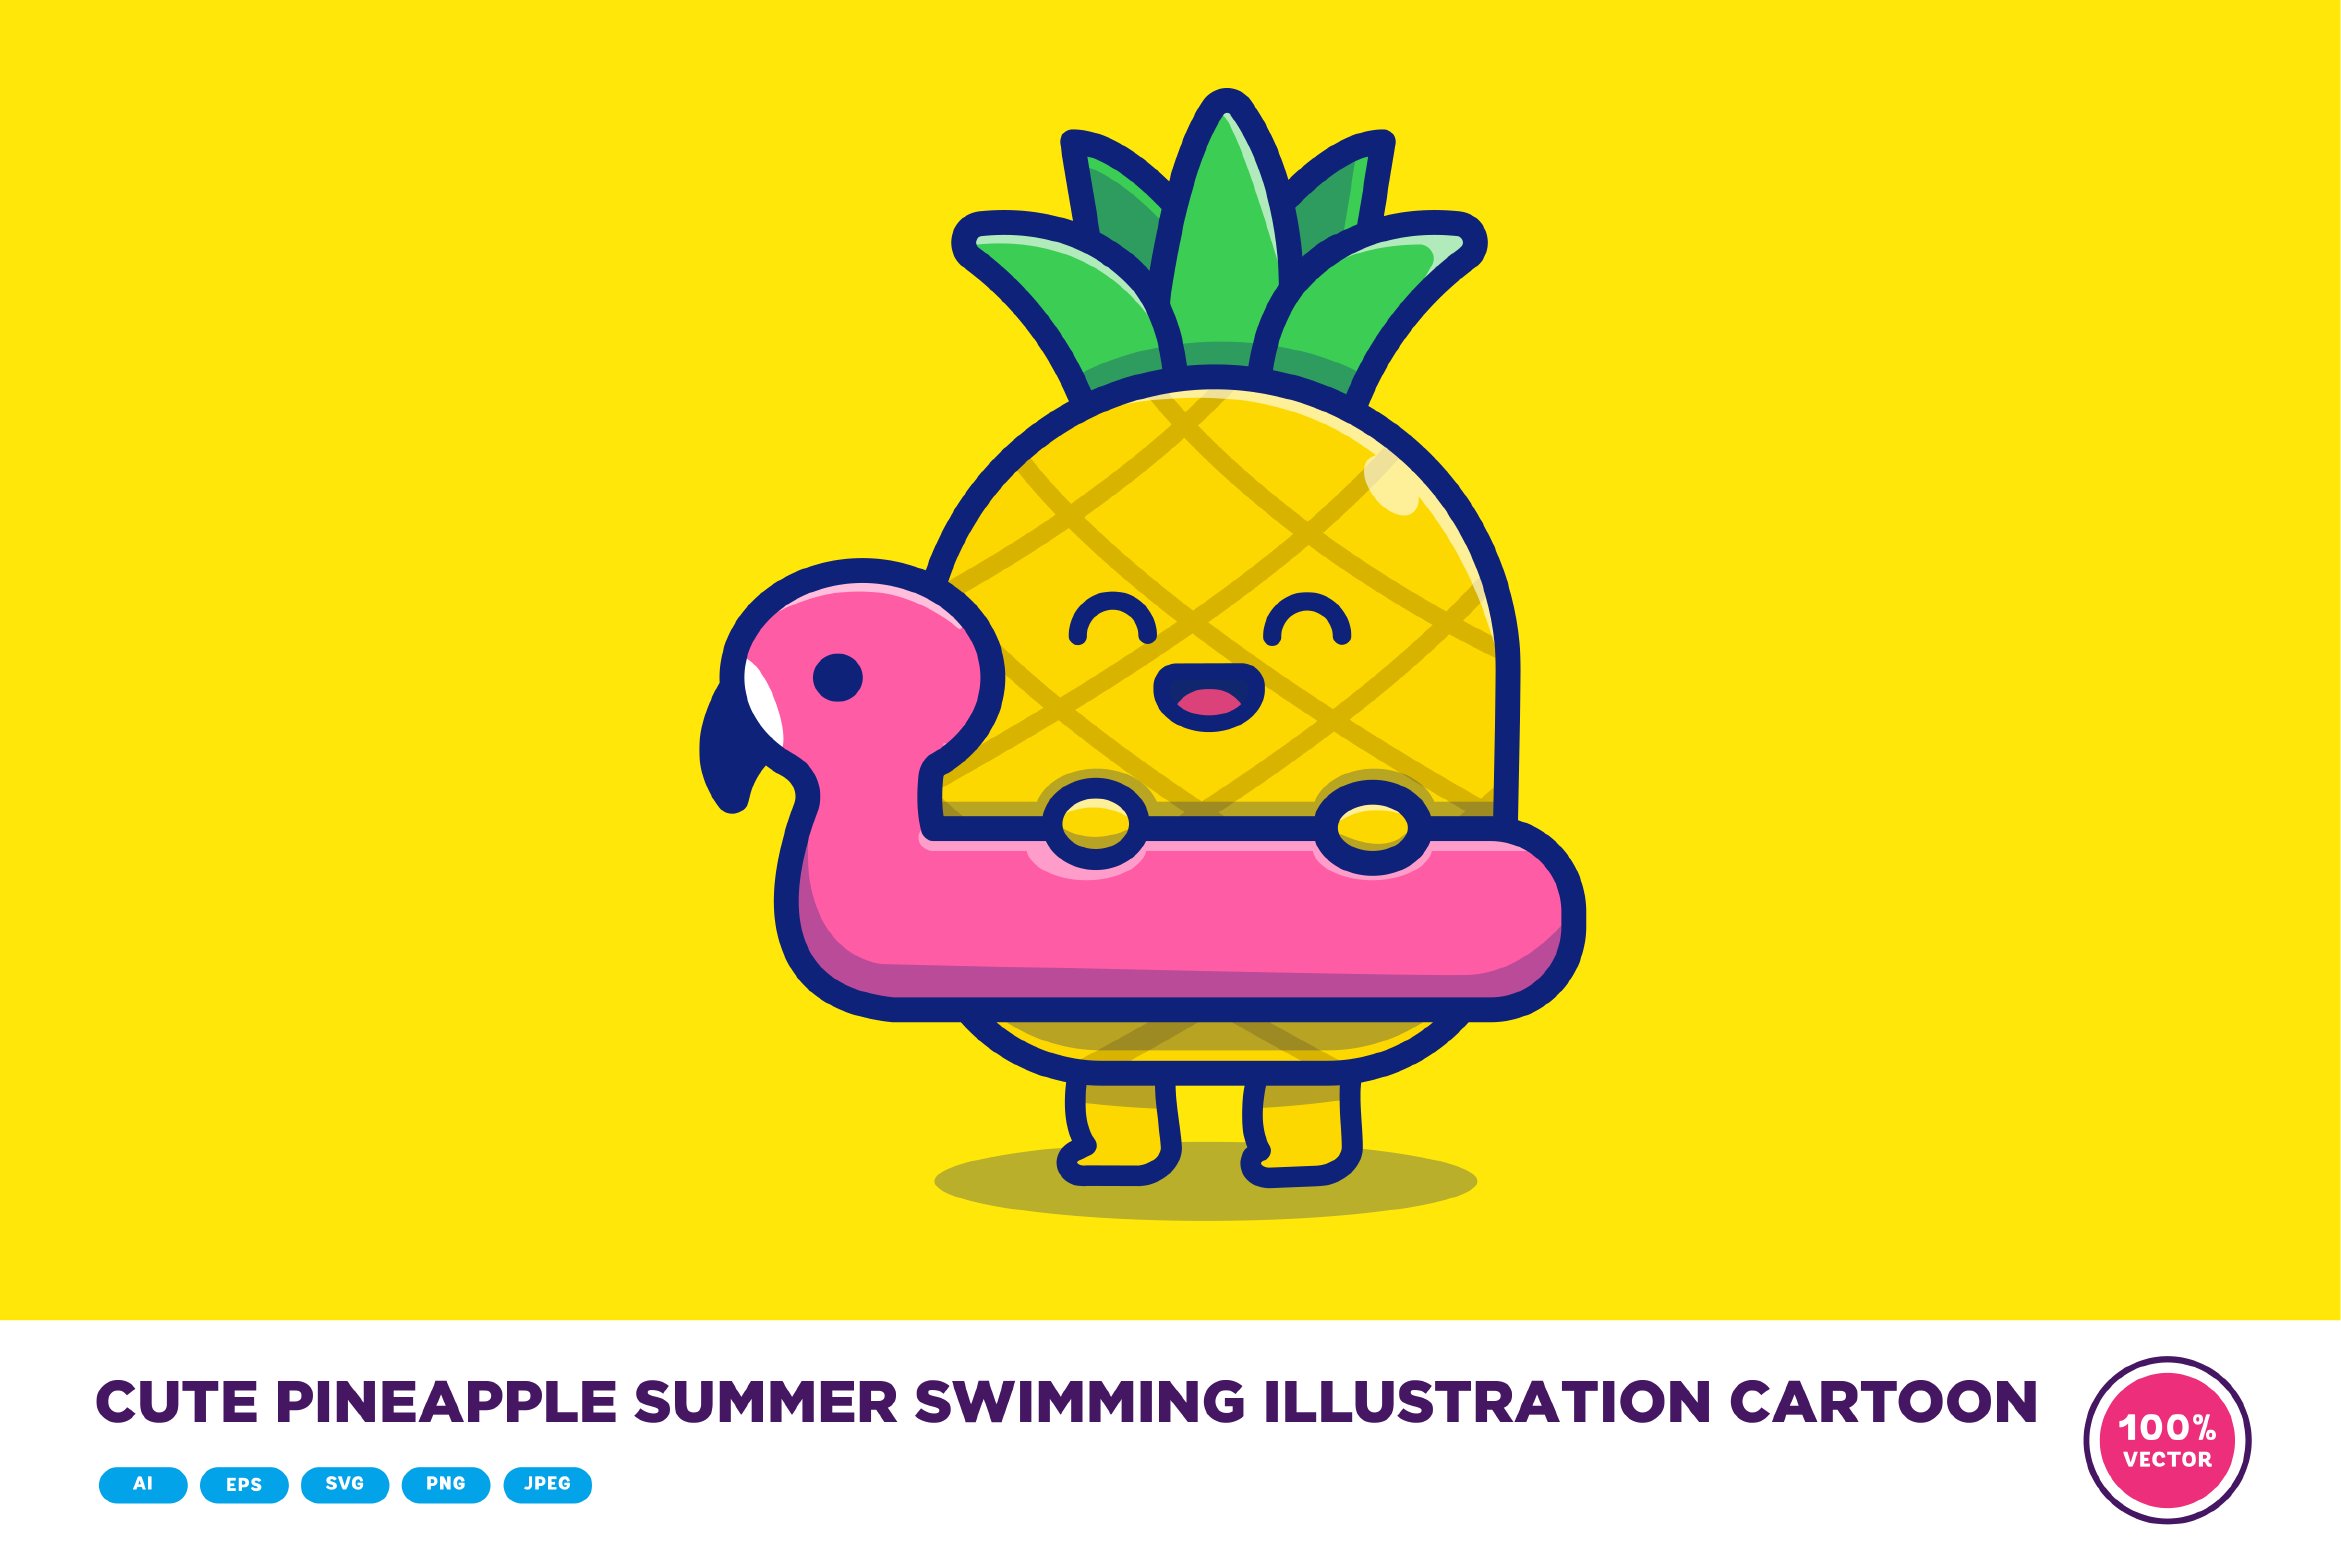 Cute Pineapple Summer Swimming cover image.